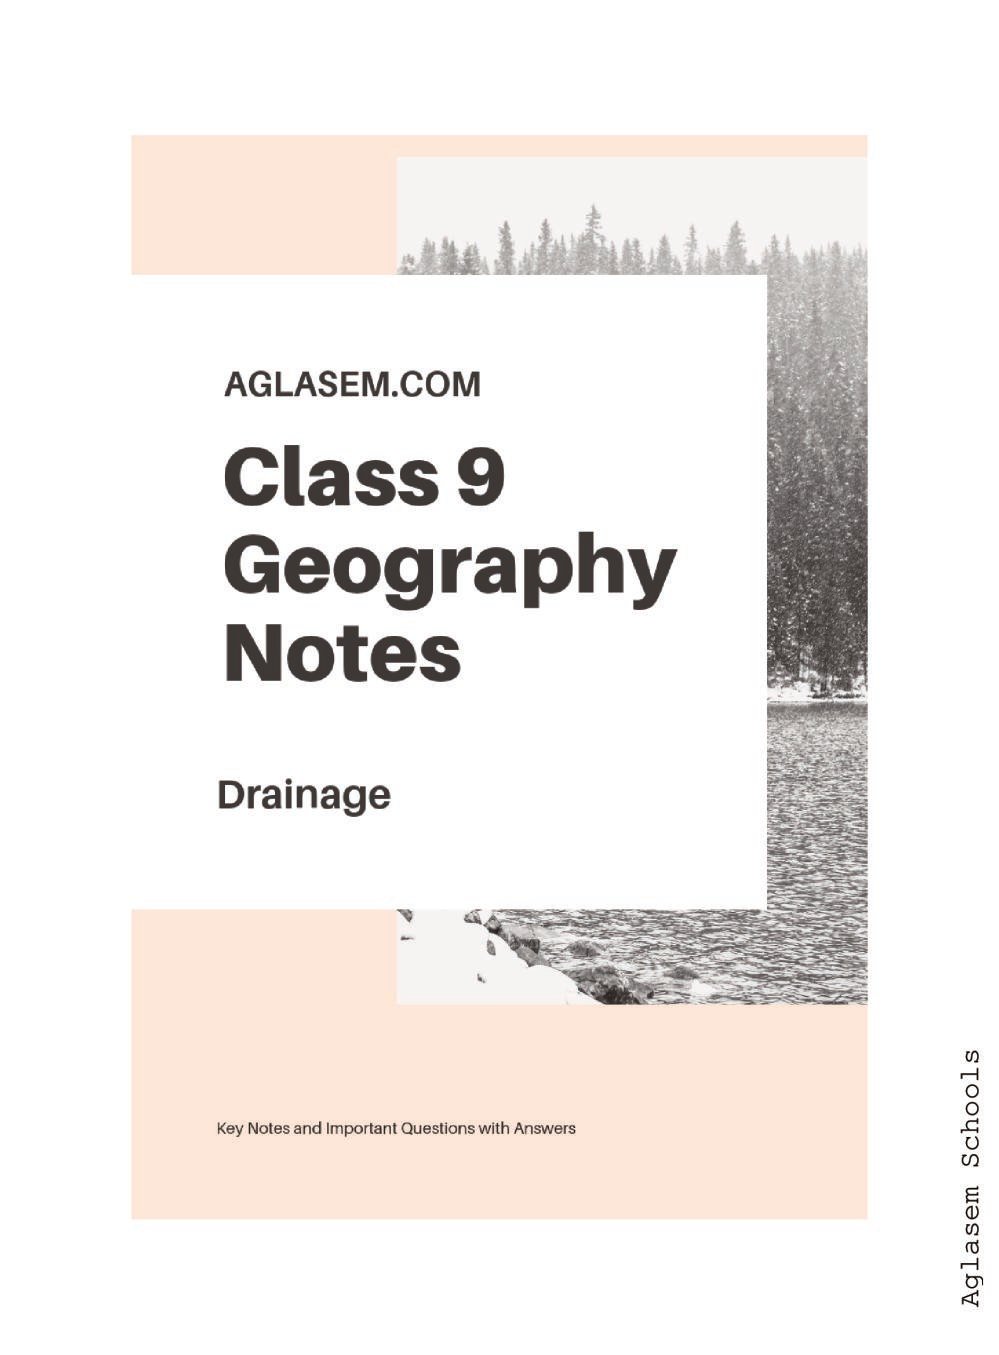 Class 9 Social Science Geography Notes for Drainage - Page 1